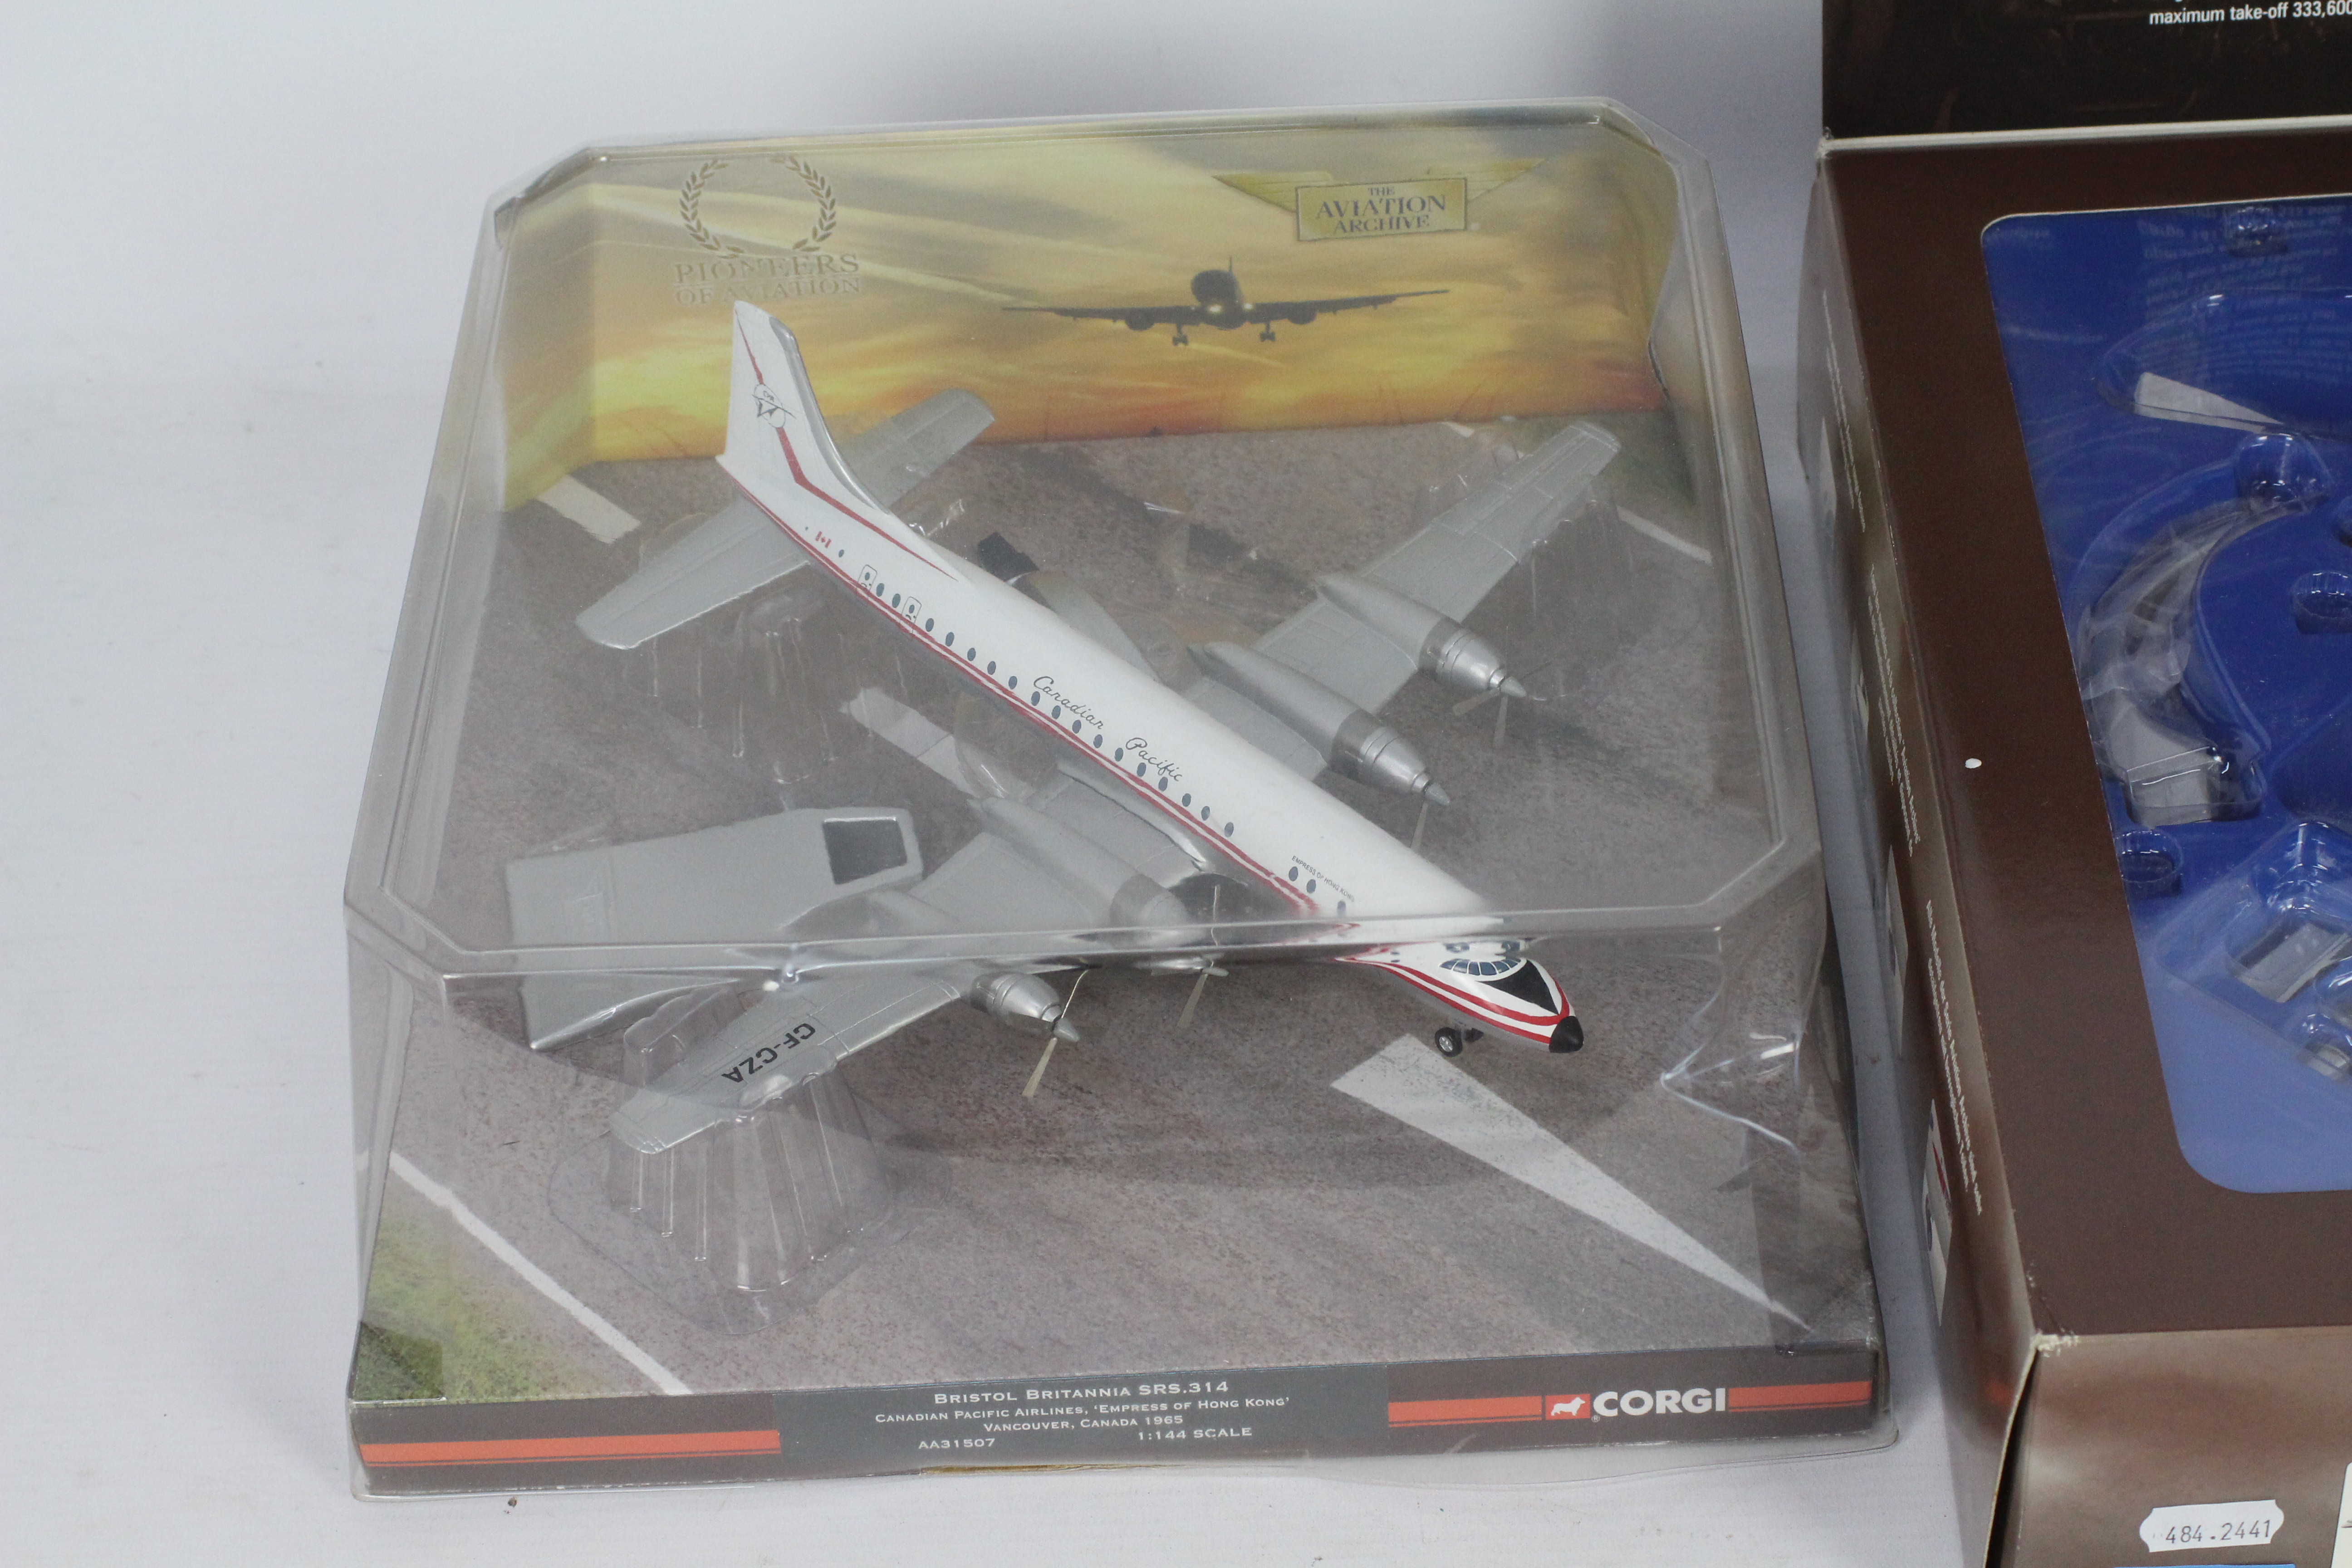 Corgi Aviation Archive - Two boxed 1:144 scale diecast model civilian aircraft. - Image 2 of 4